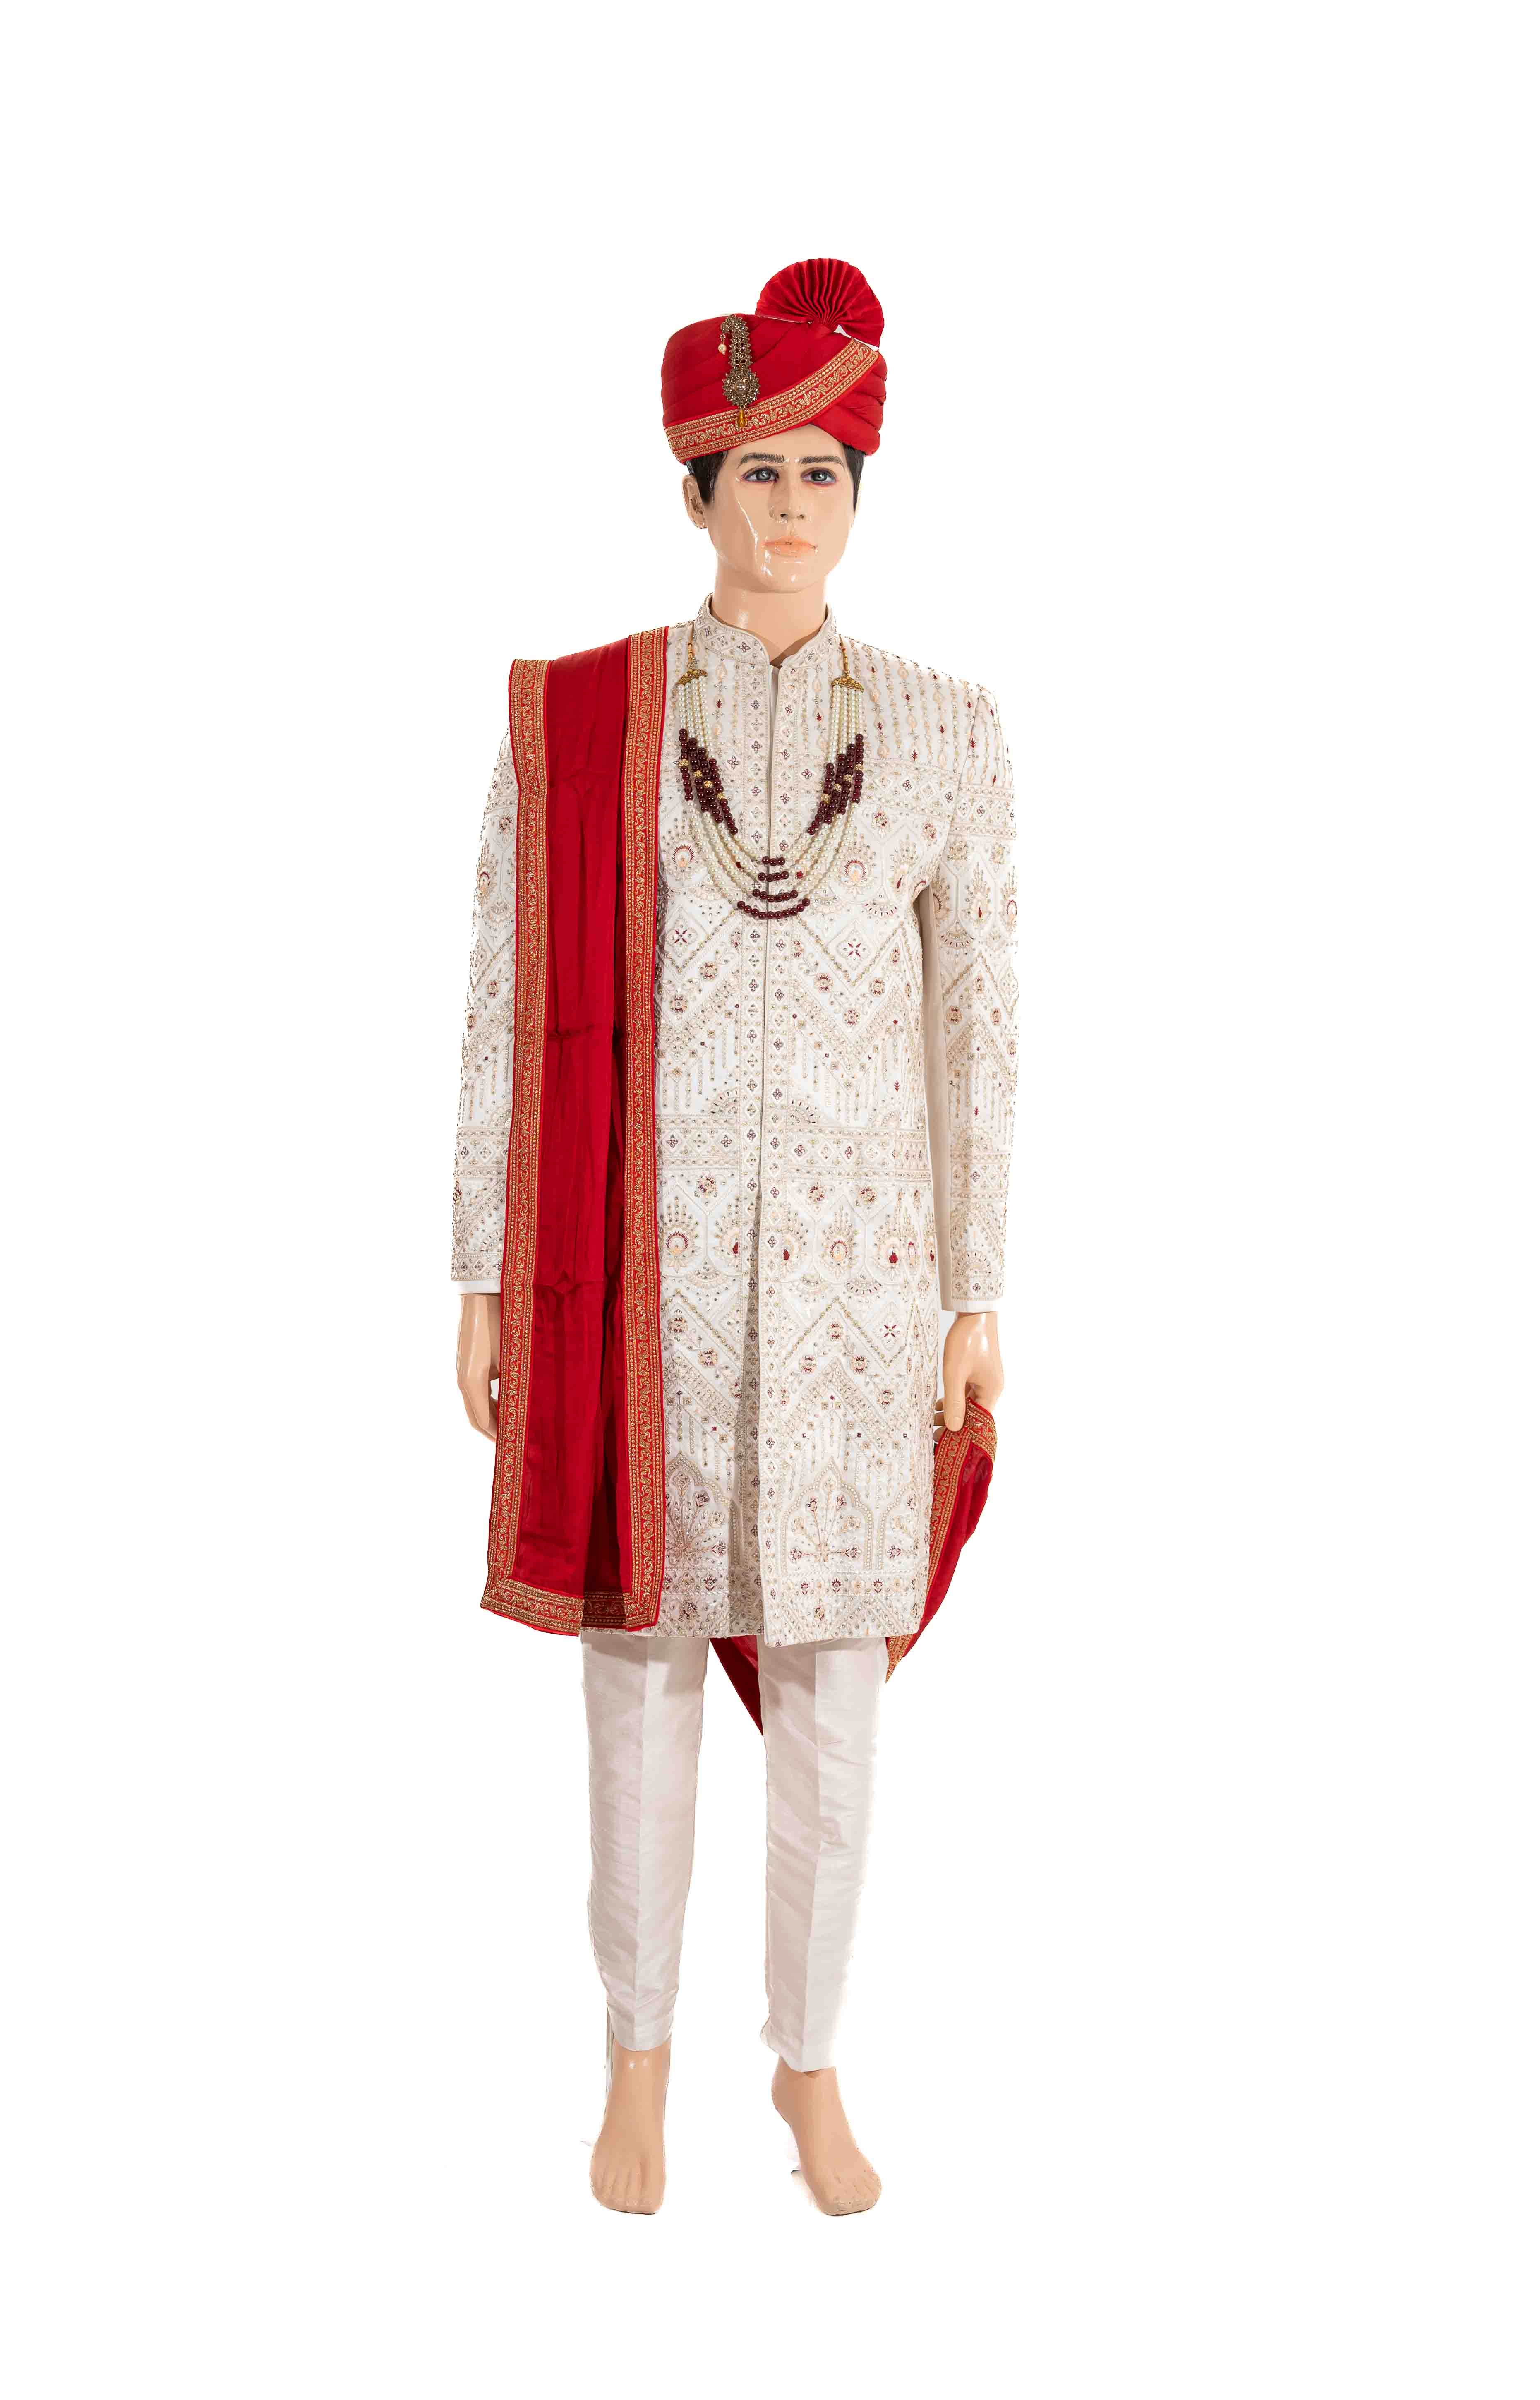 G3+ Fashions - This Designer Double Layer Sherwani Suit is... | Facebook